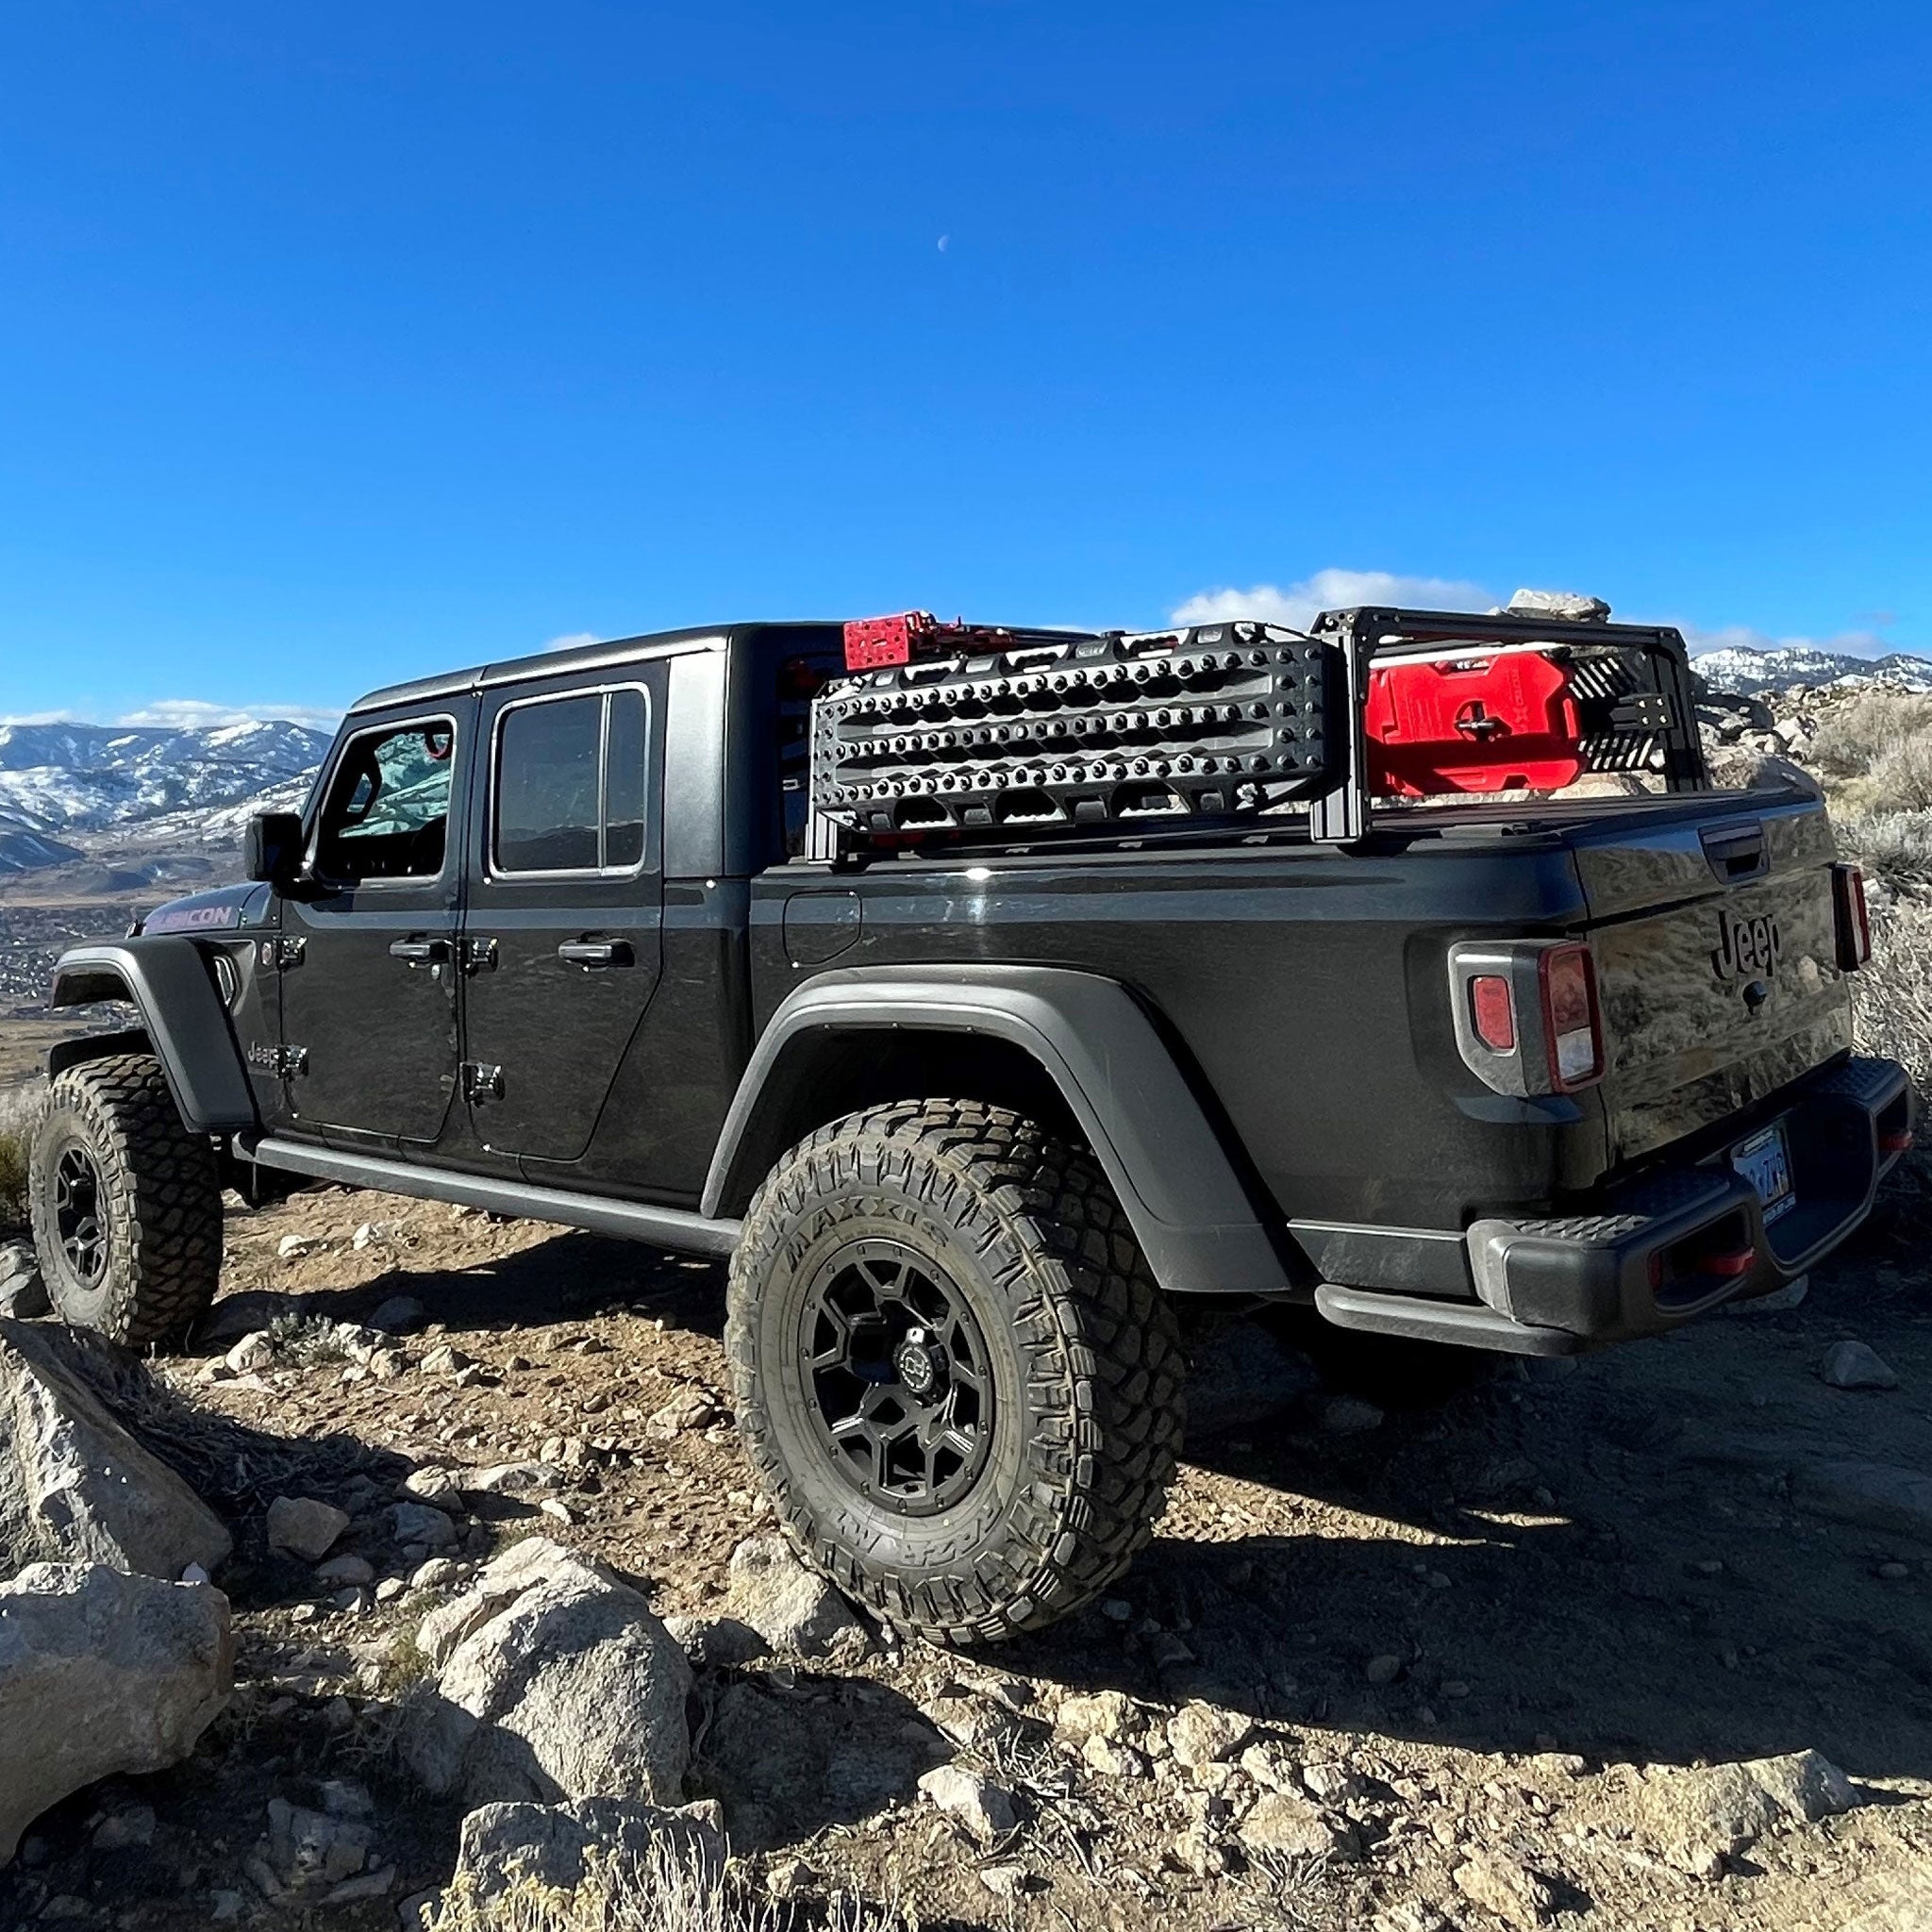 Xtrusion Overland XTR1 Bed rack for Jeep Gladiator with Molle Panels, RotoPax, Hi-Lift, and Traction boards.